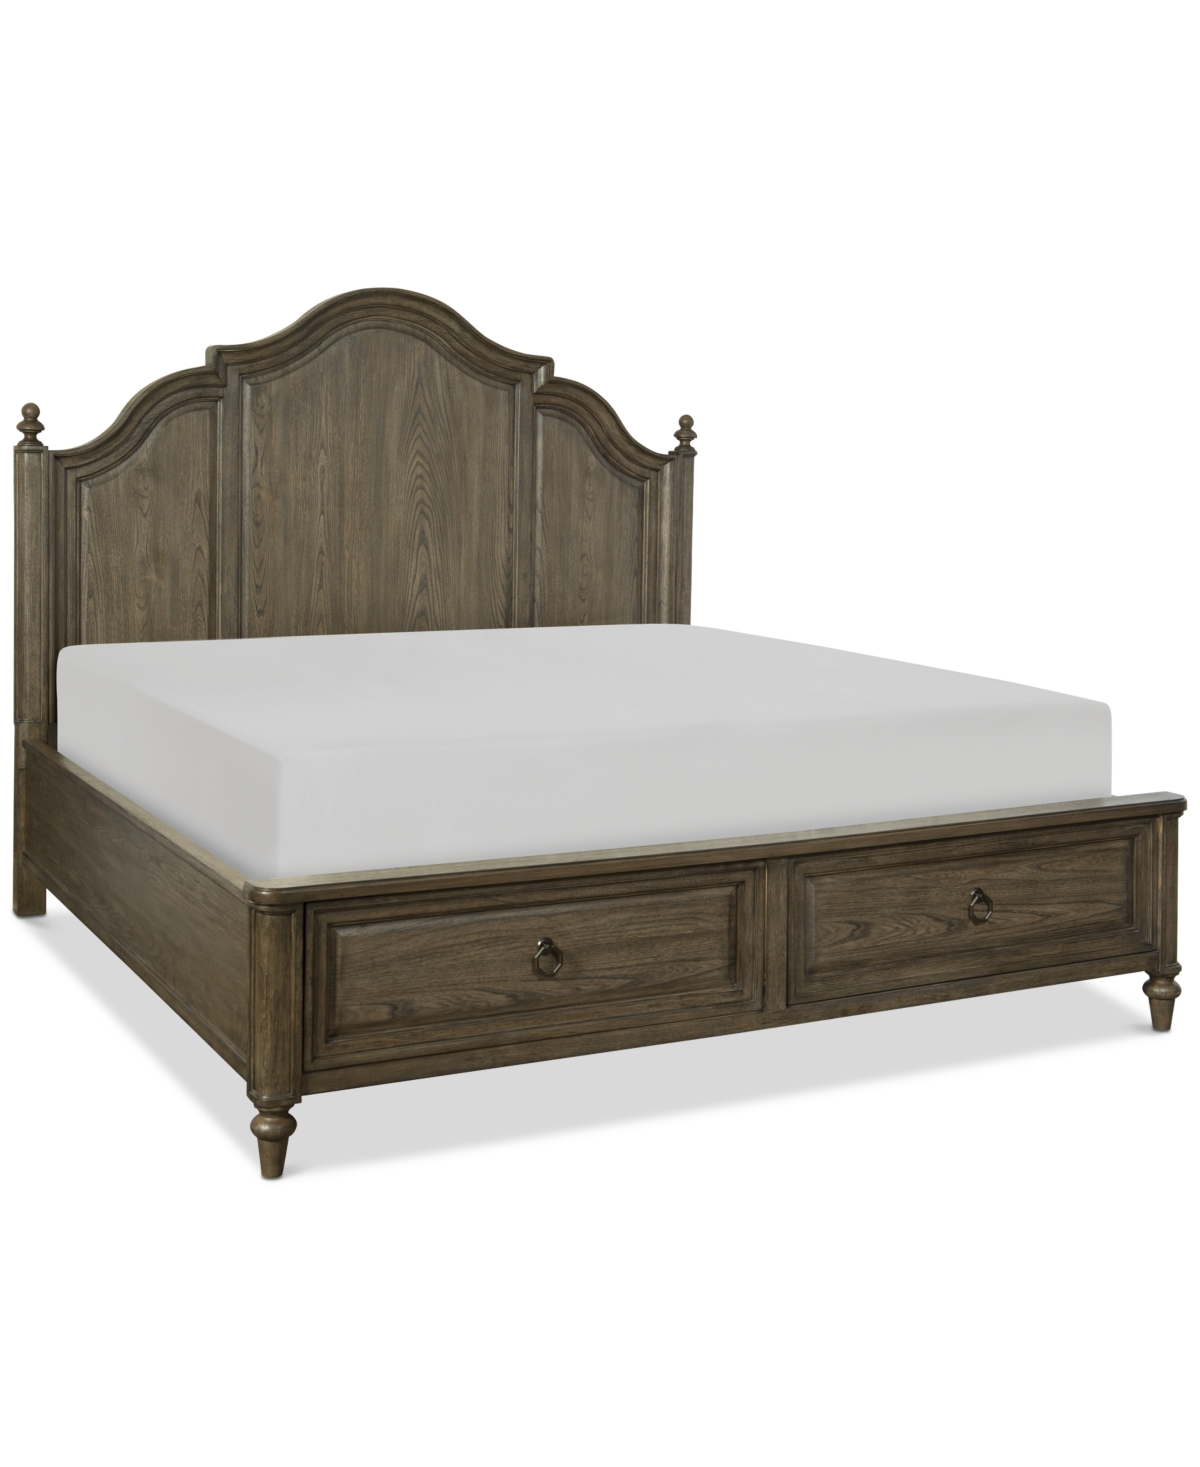 Barclay King Storage Bed